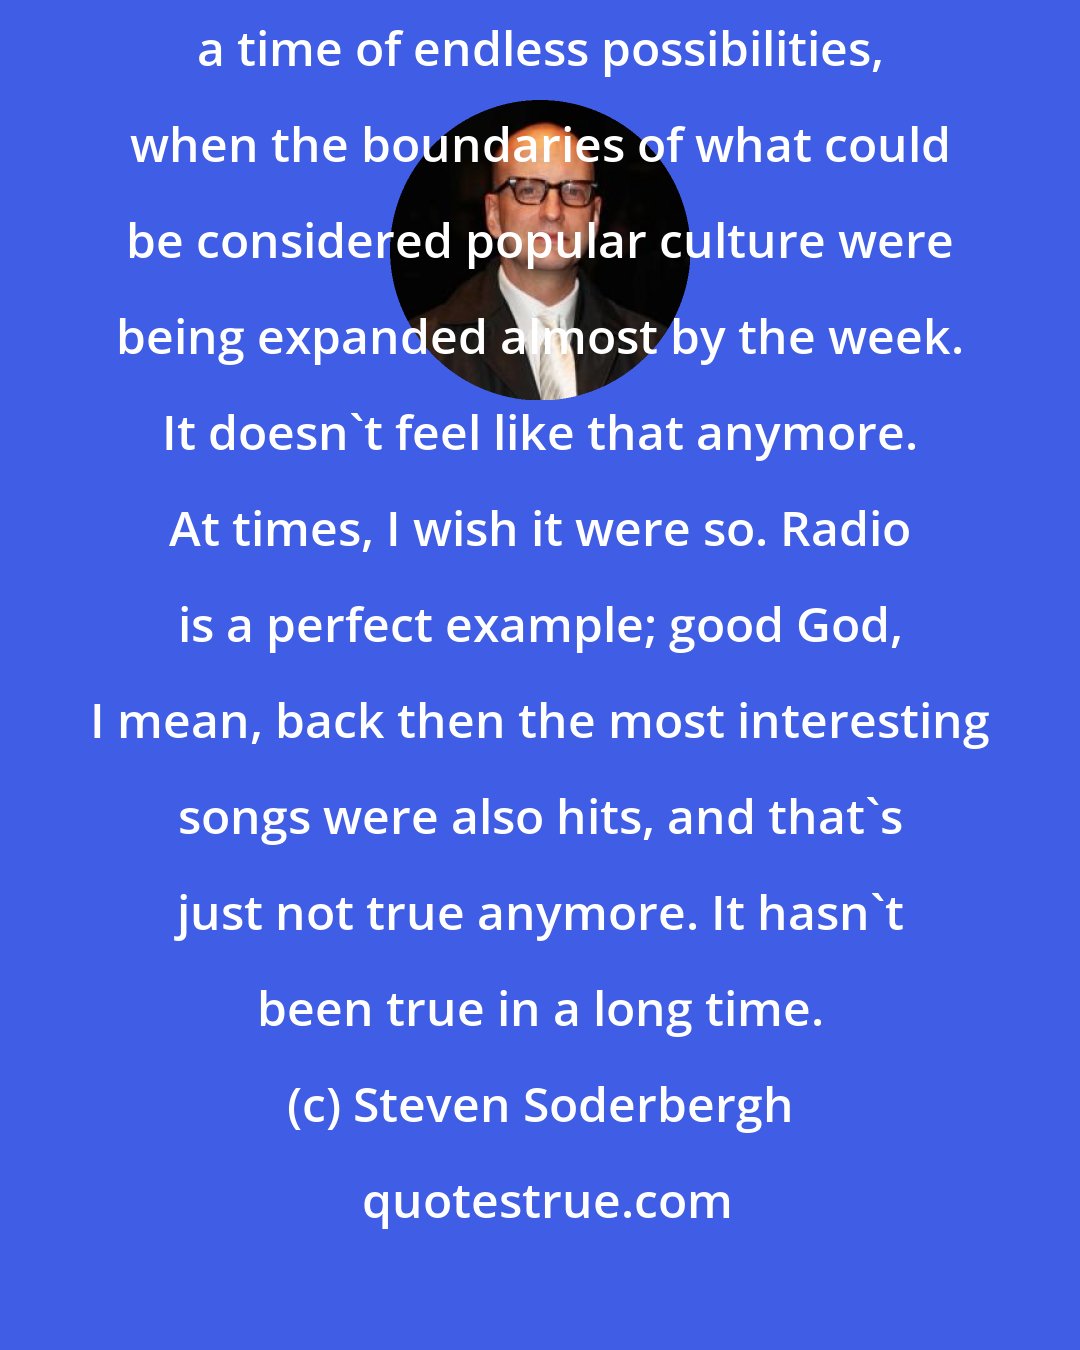 Steven Soderbergh: I think '60s are appealing to creative people, because it seemed to be a time of endless possibilities, when the boundaries of what could be considered popular culture were being expanded almost by the week. It doesn't feel like that anymore. At times, I wish it were so. Radio is a perfect example; good God, I mean, back then the most interesting songs were also hits, and that's just not true anymore. It hasn't been true in a long time.